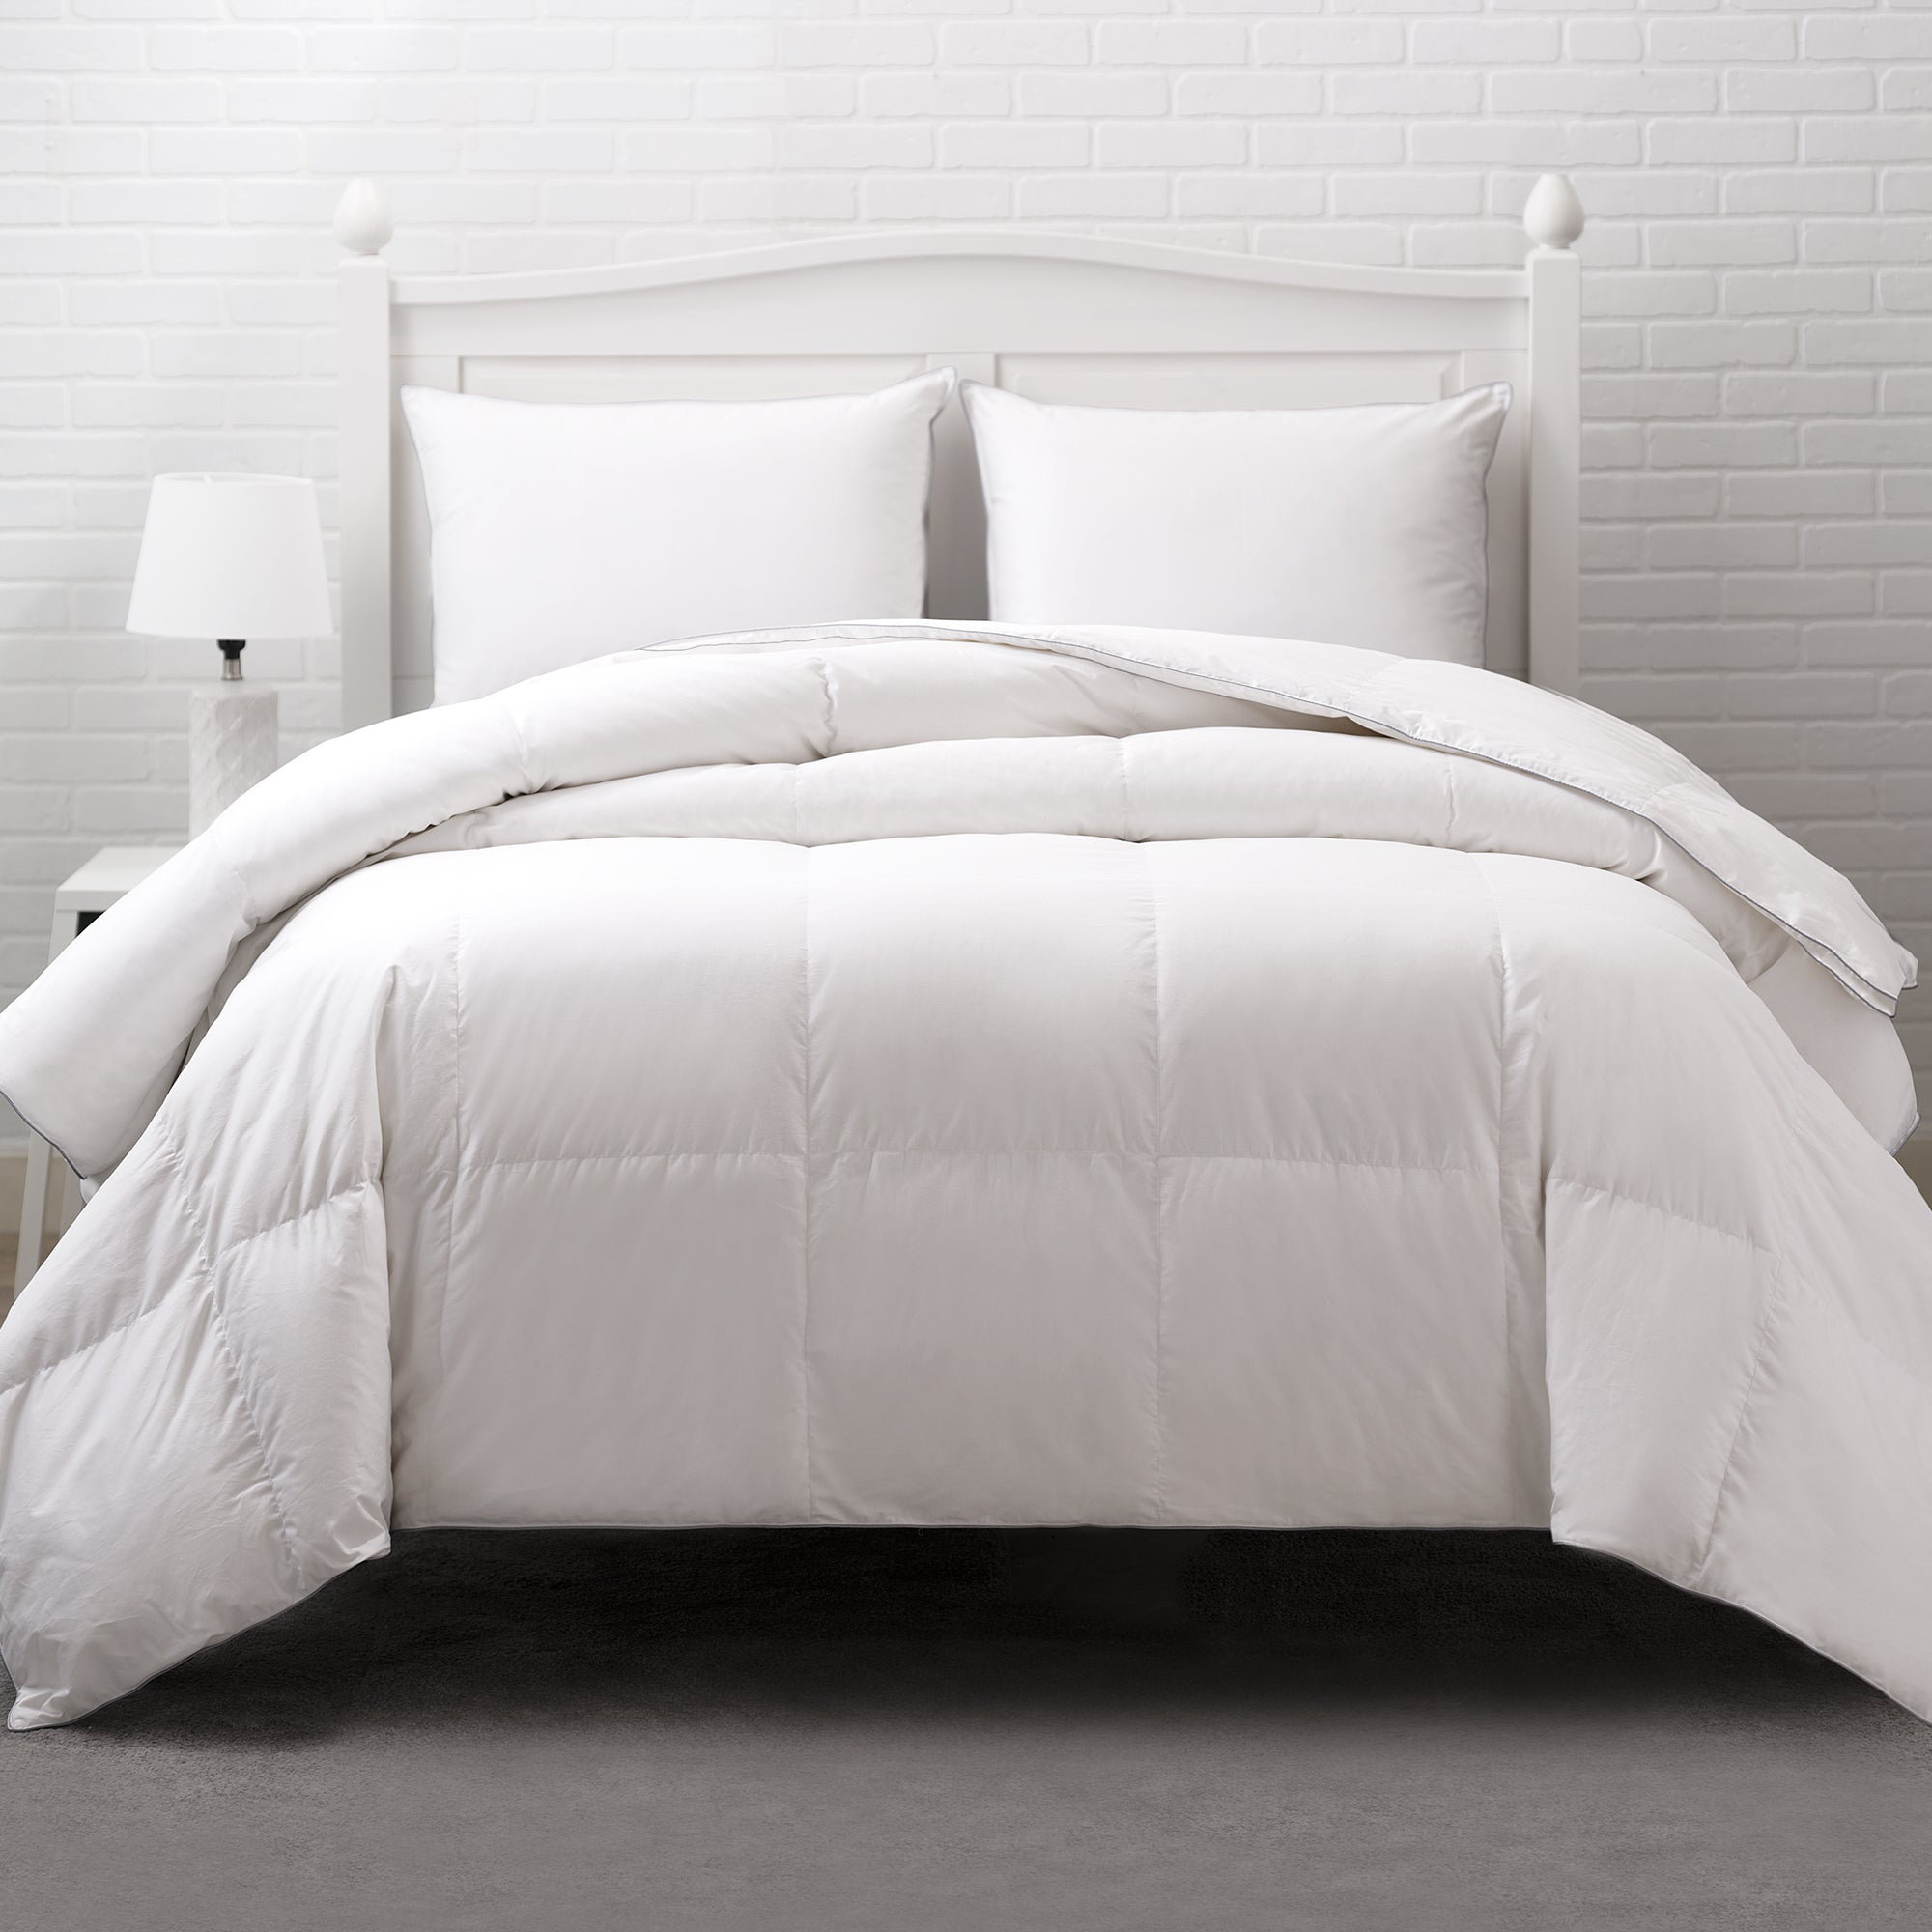 Luxury White Cotton Duck Down Feather All Season Twin Queen King Comforter 